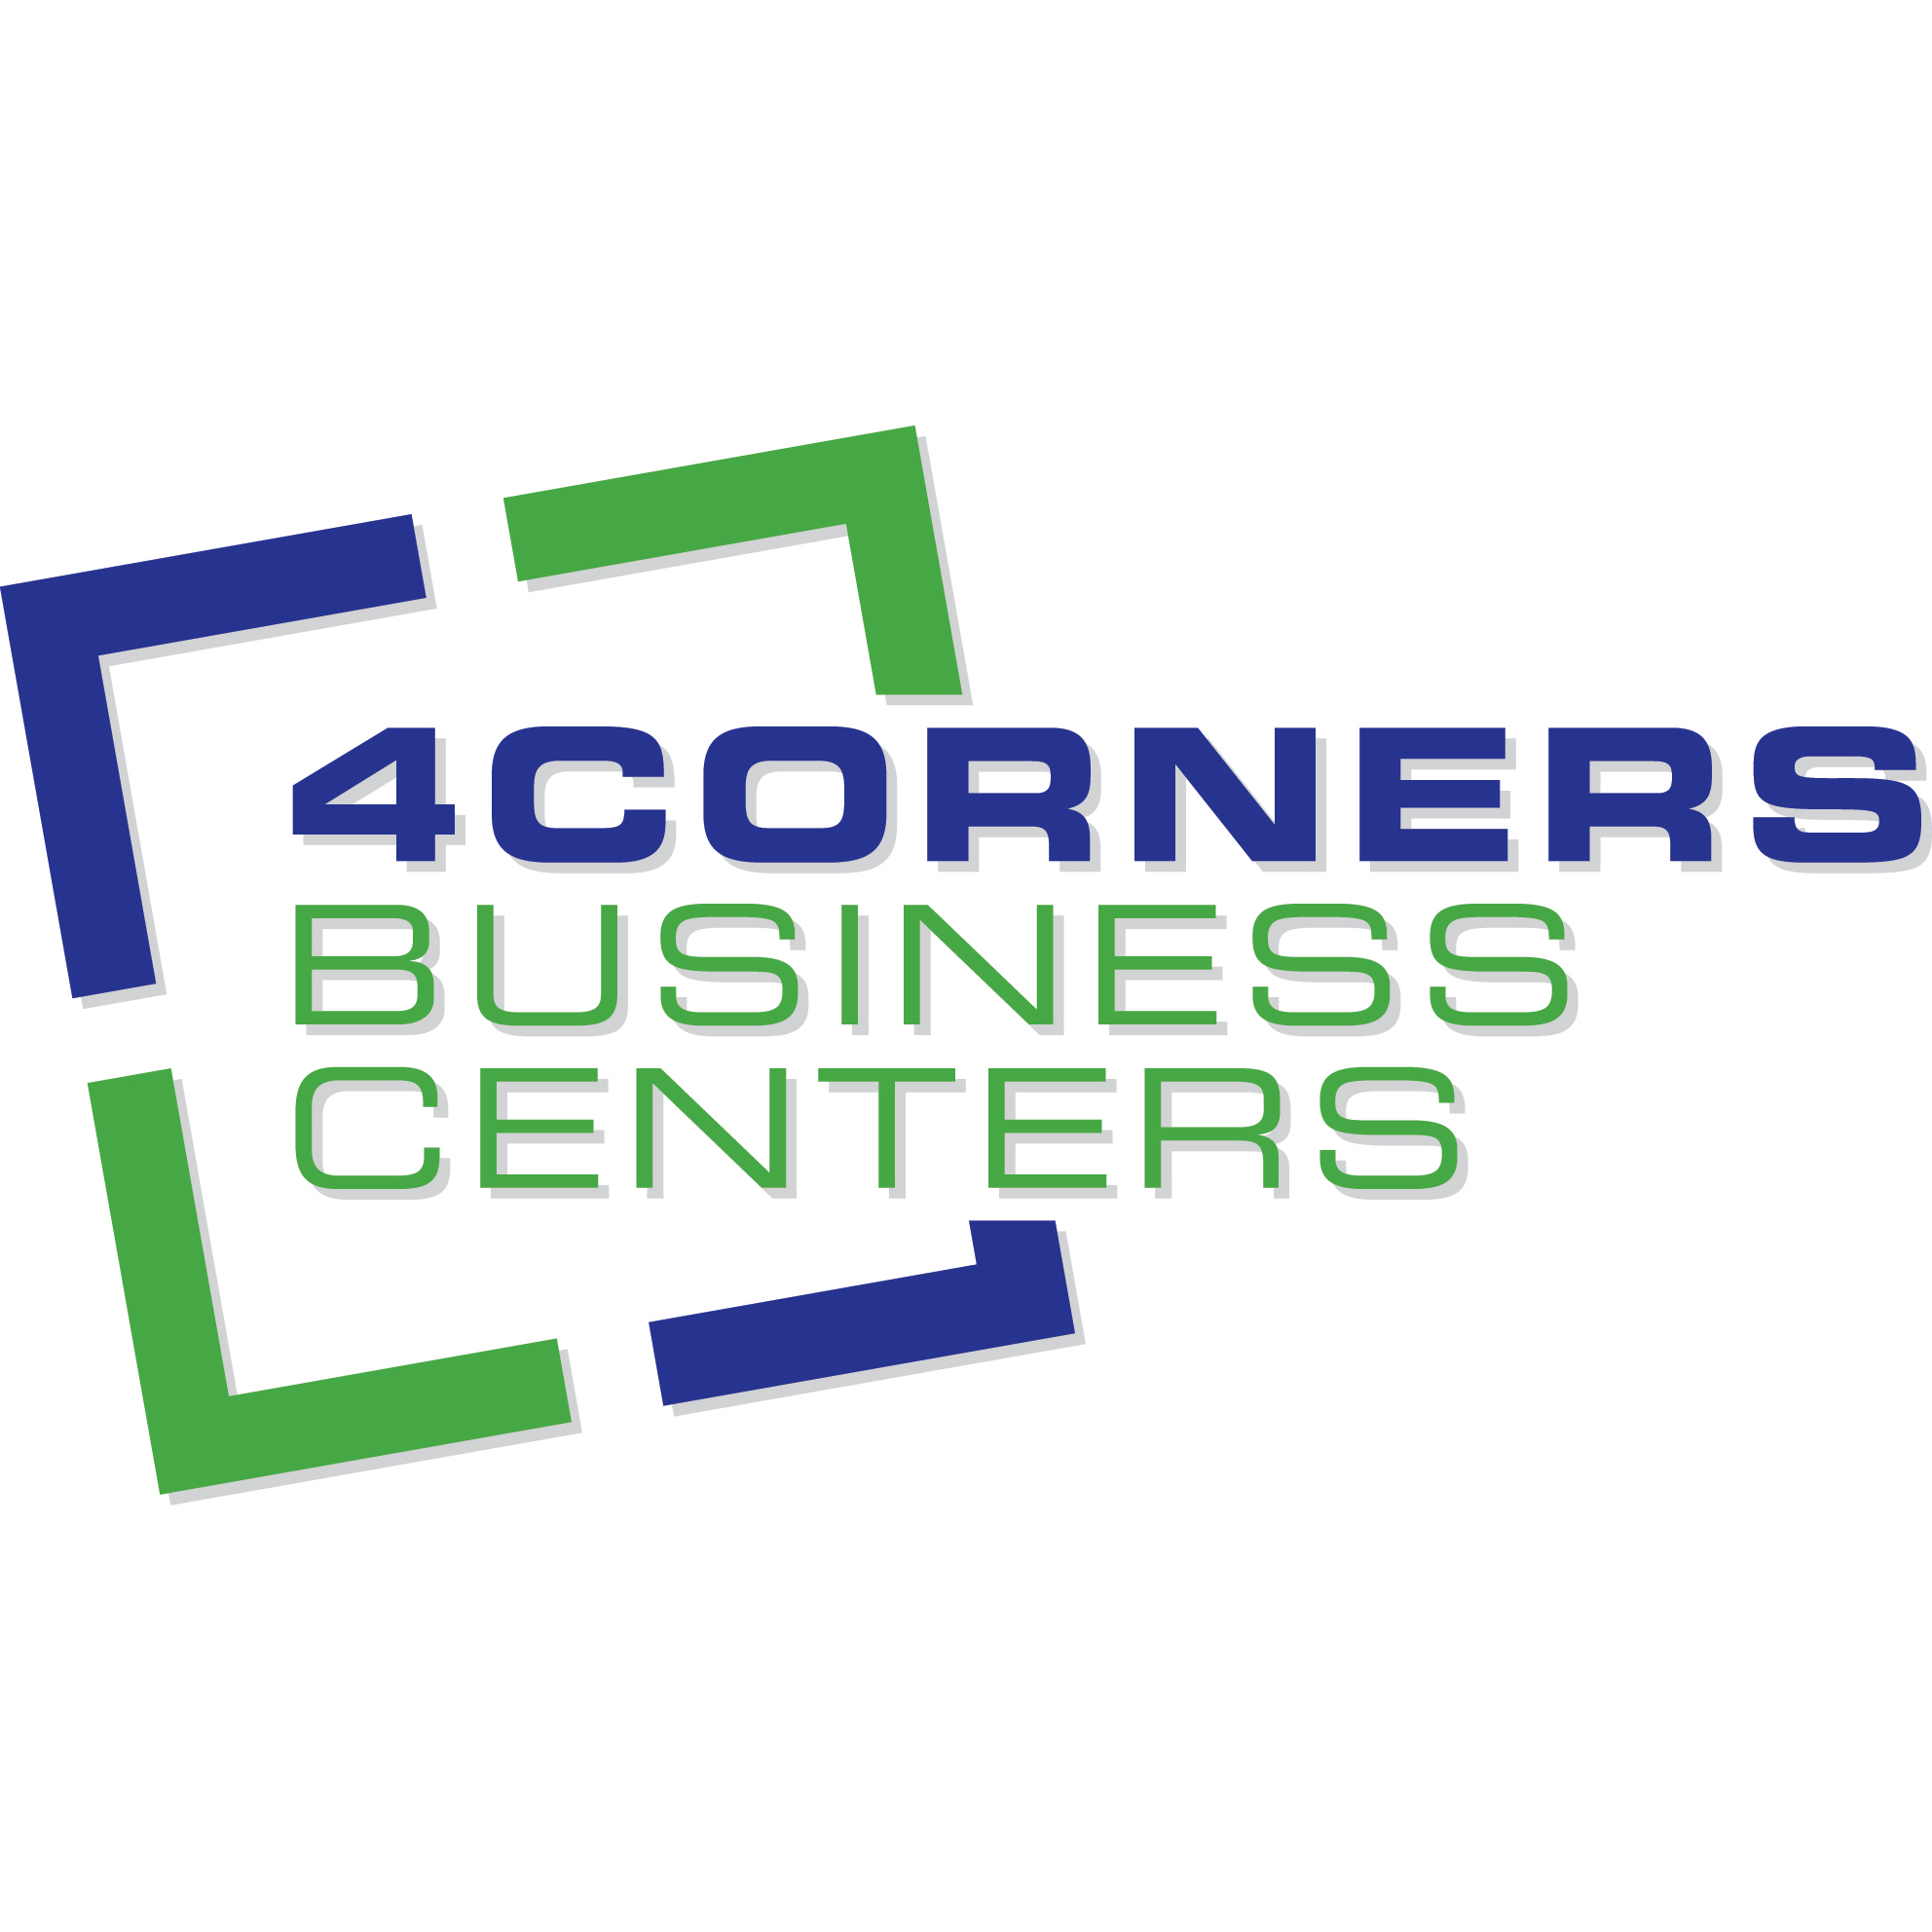 4Corners Business Centers - Brooklyn, NY 11201 - (718)280-5170 | ShowMeLocal.com